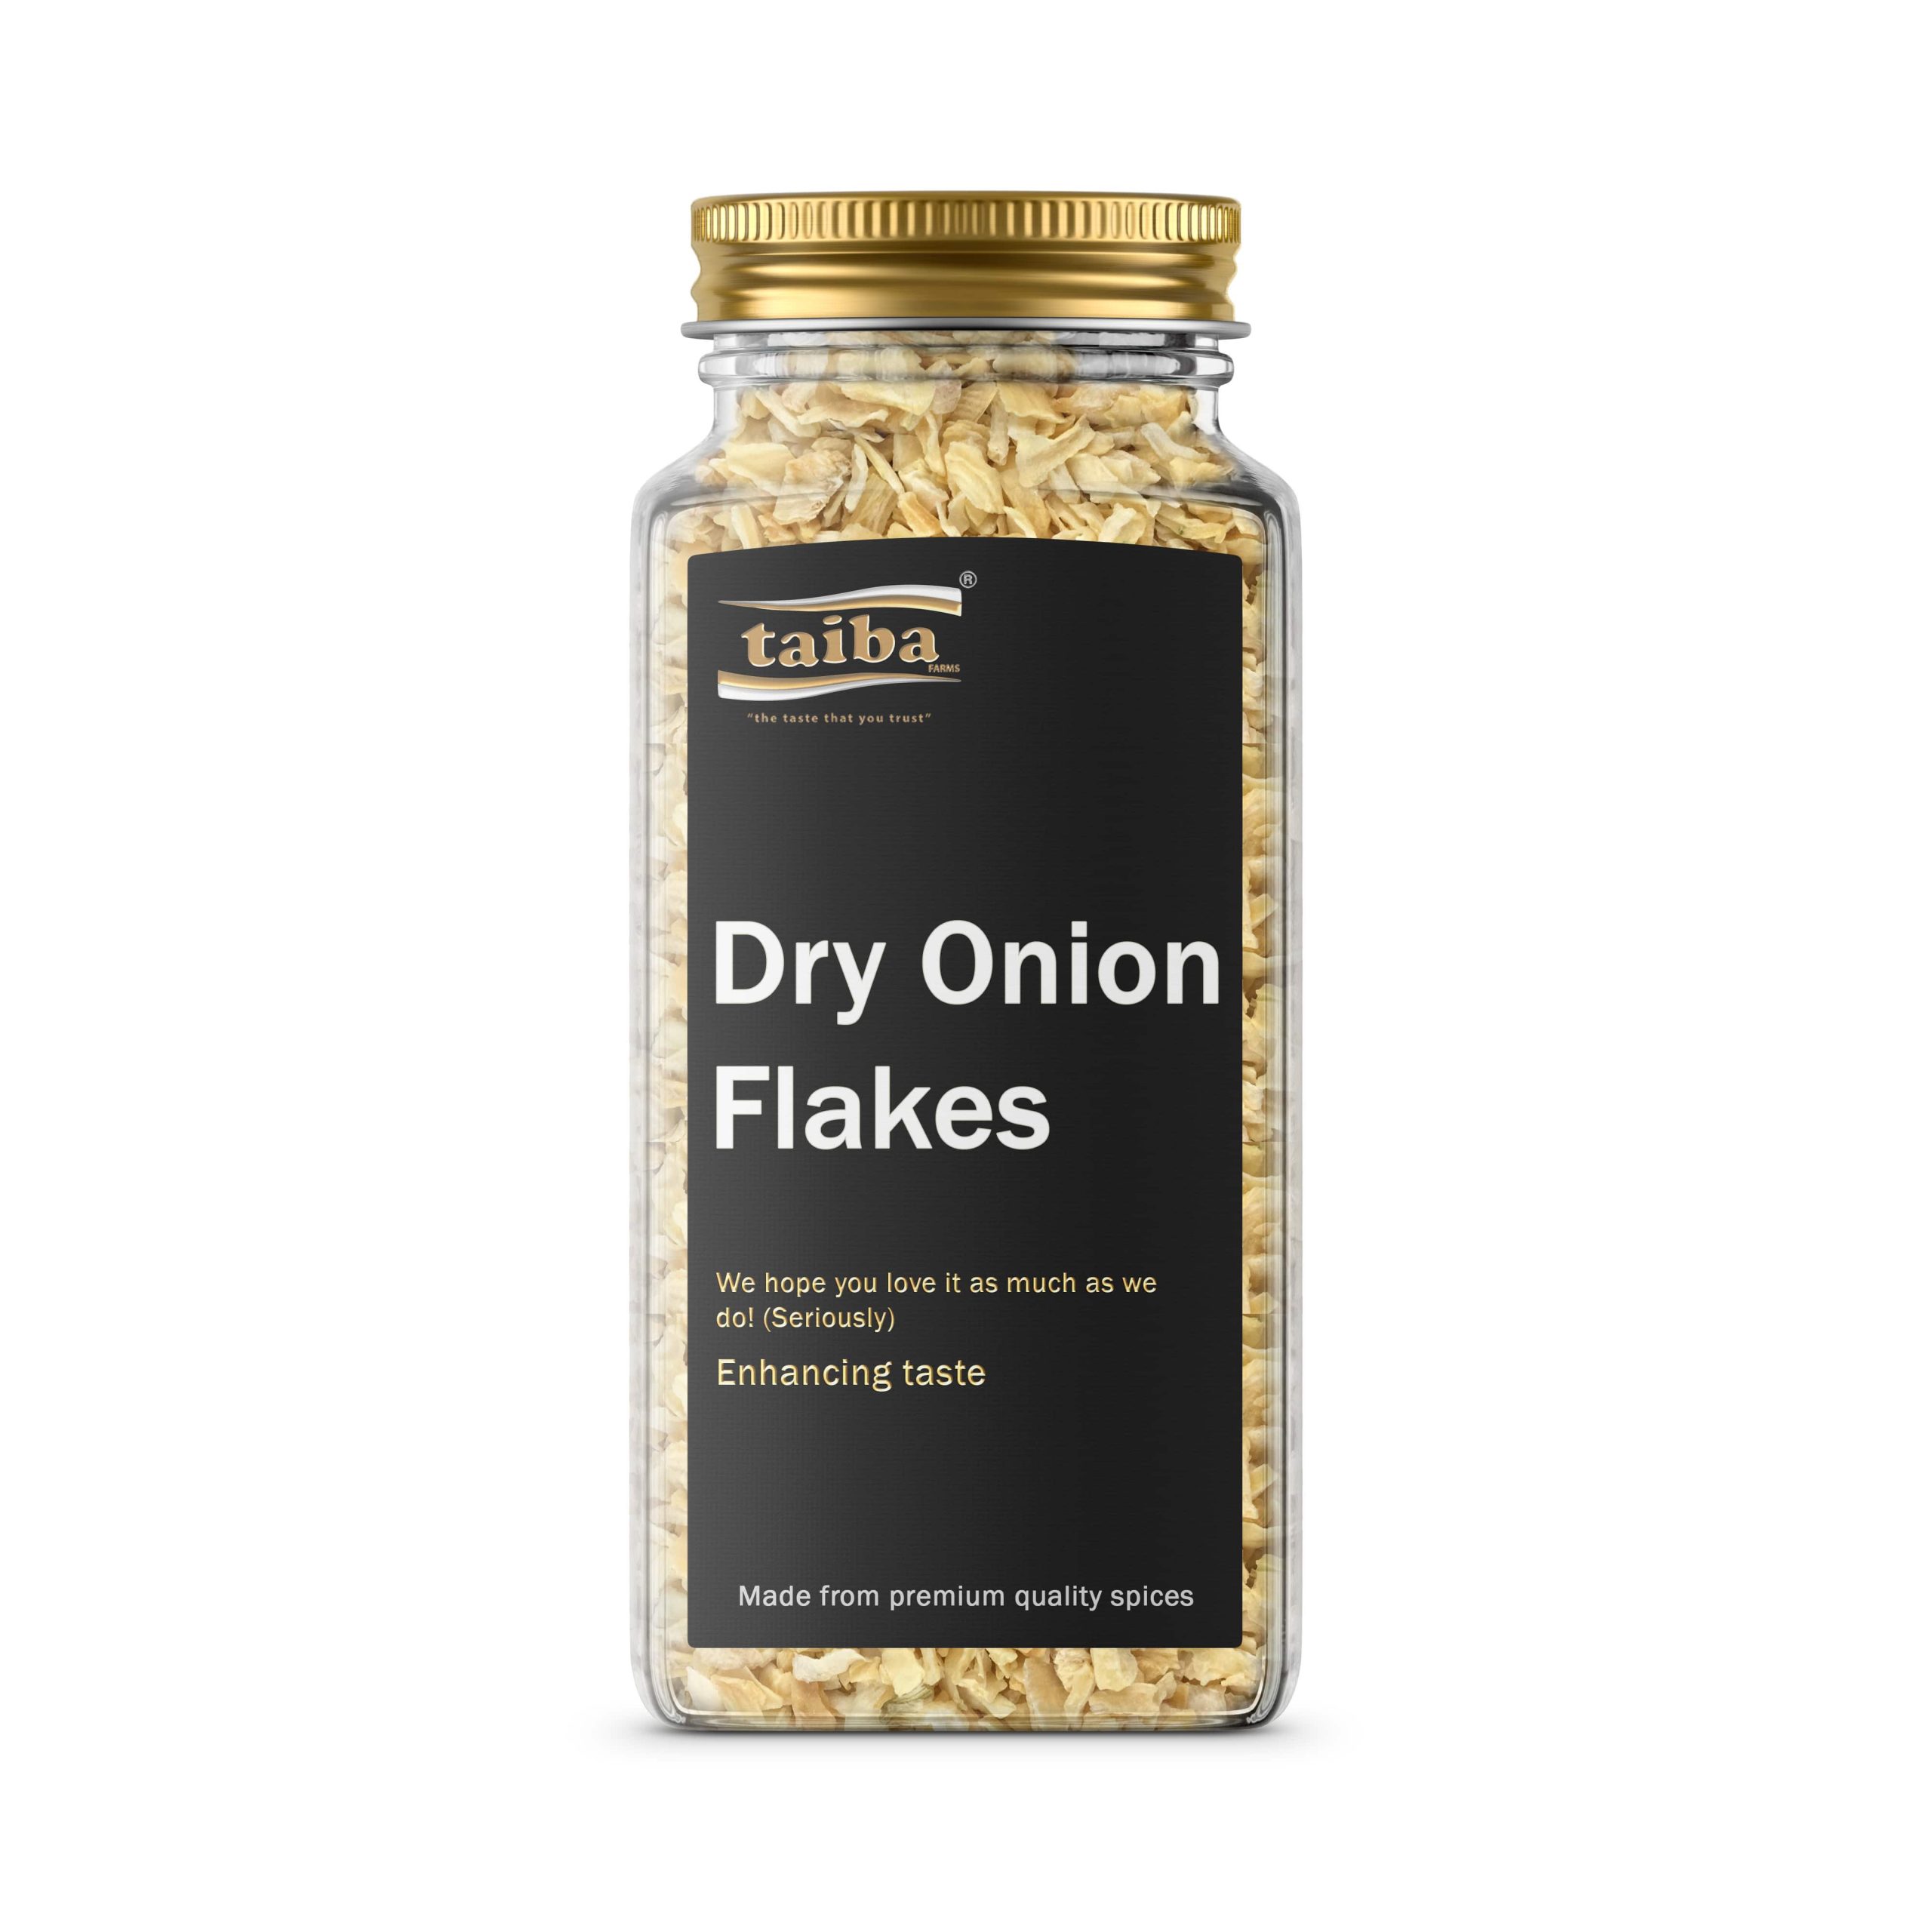 dry-onion-flakes-online-grocery-hearps-and-spices-online-suppliers-and-wholesalers-in-Brazil-Uk-Saudi-arabia-france-italy-UAE